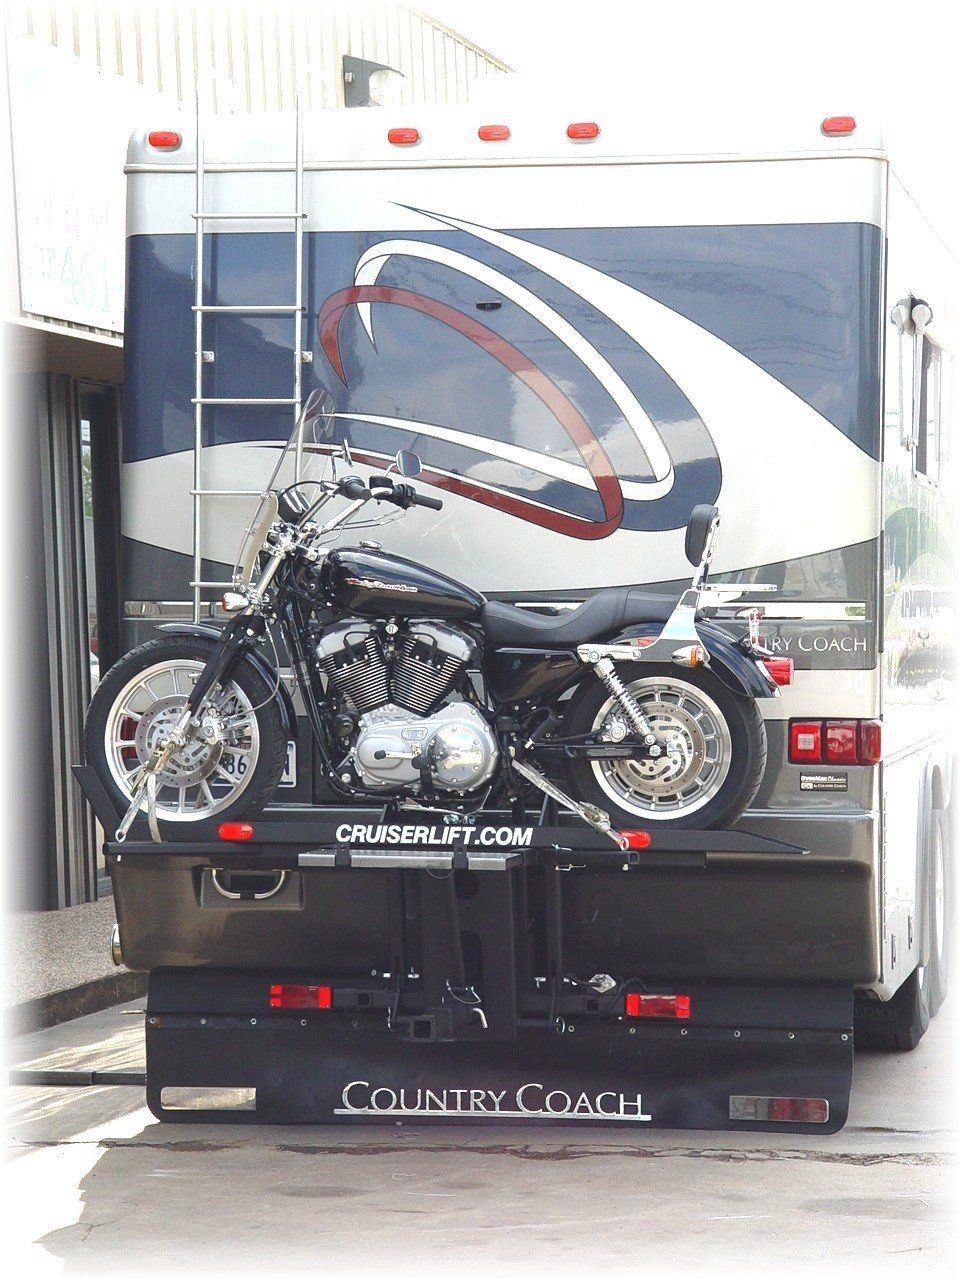 Cruiserlift/ Motorcycle RV Lift / Carrier / Hauler /Country Coach / Motorcycle/MotorHome